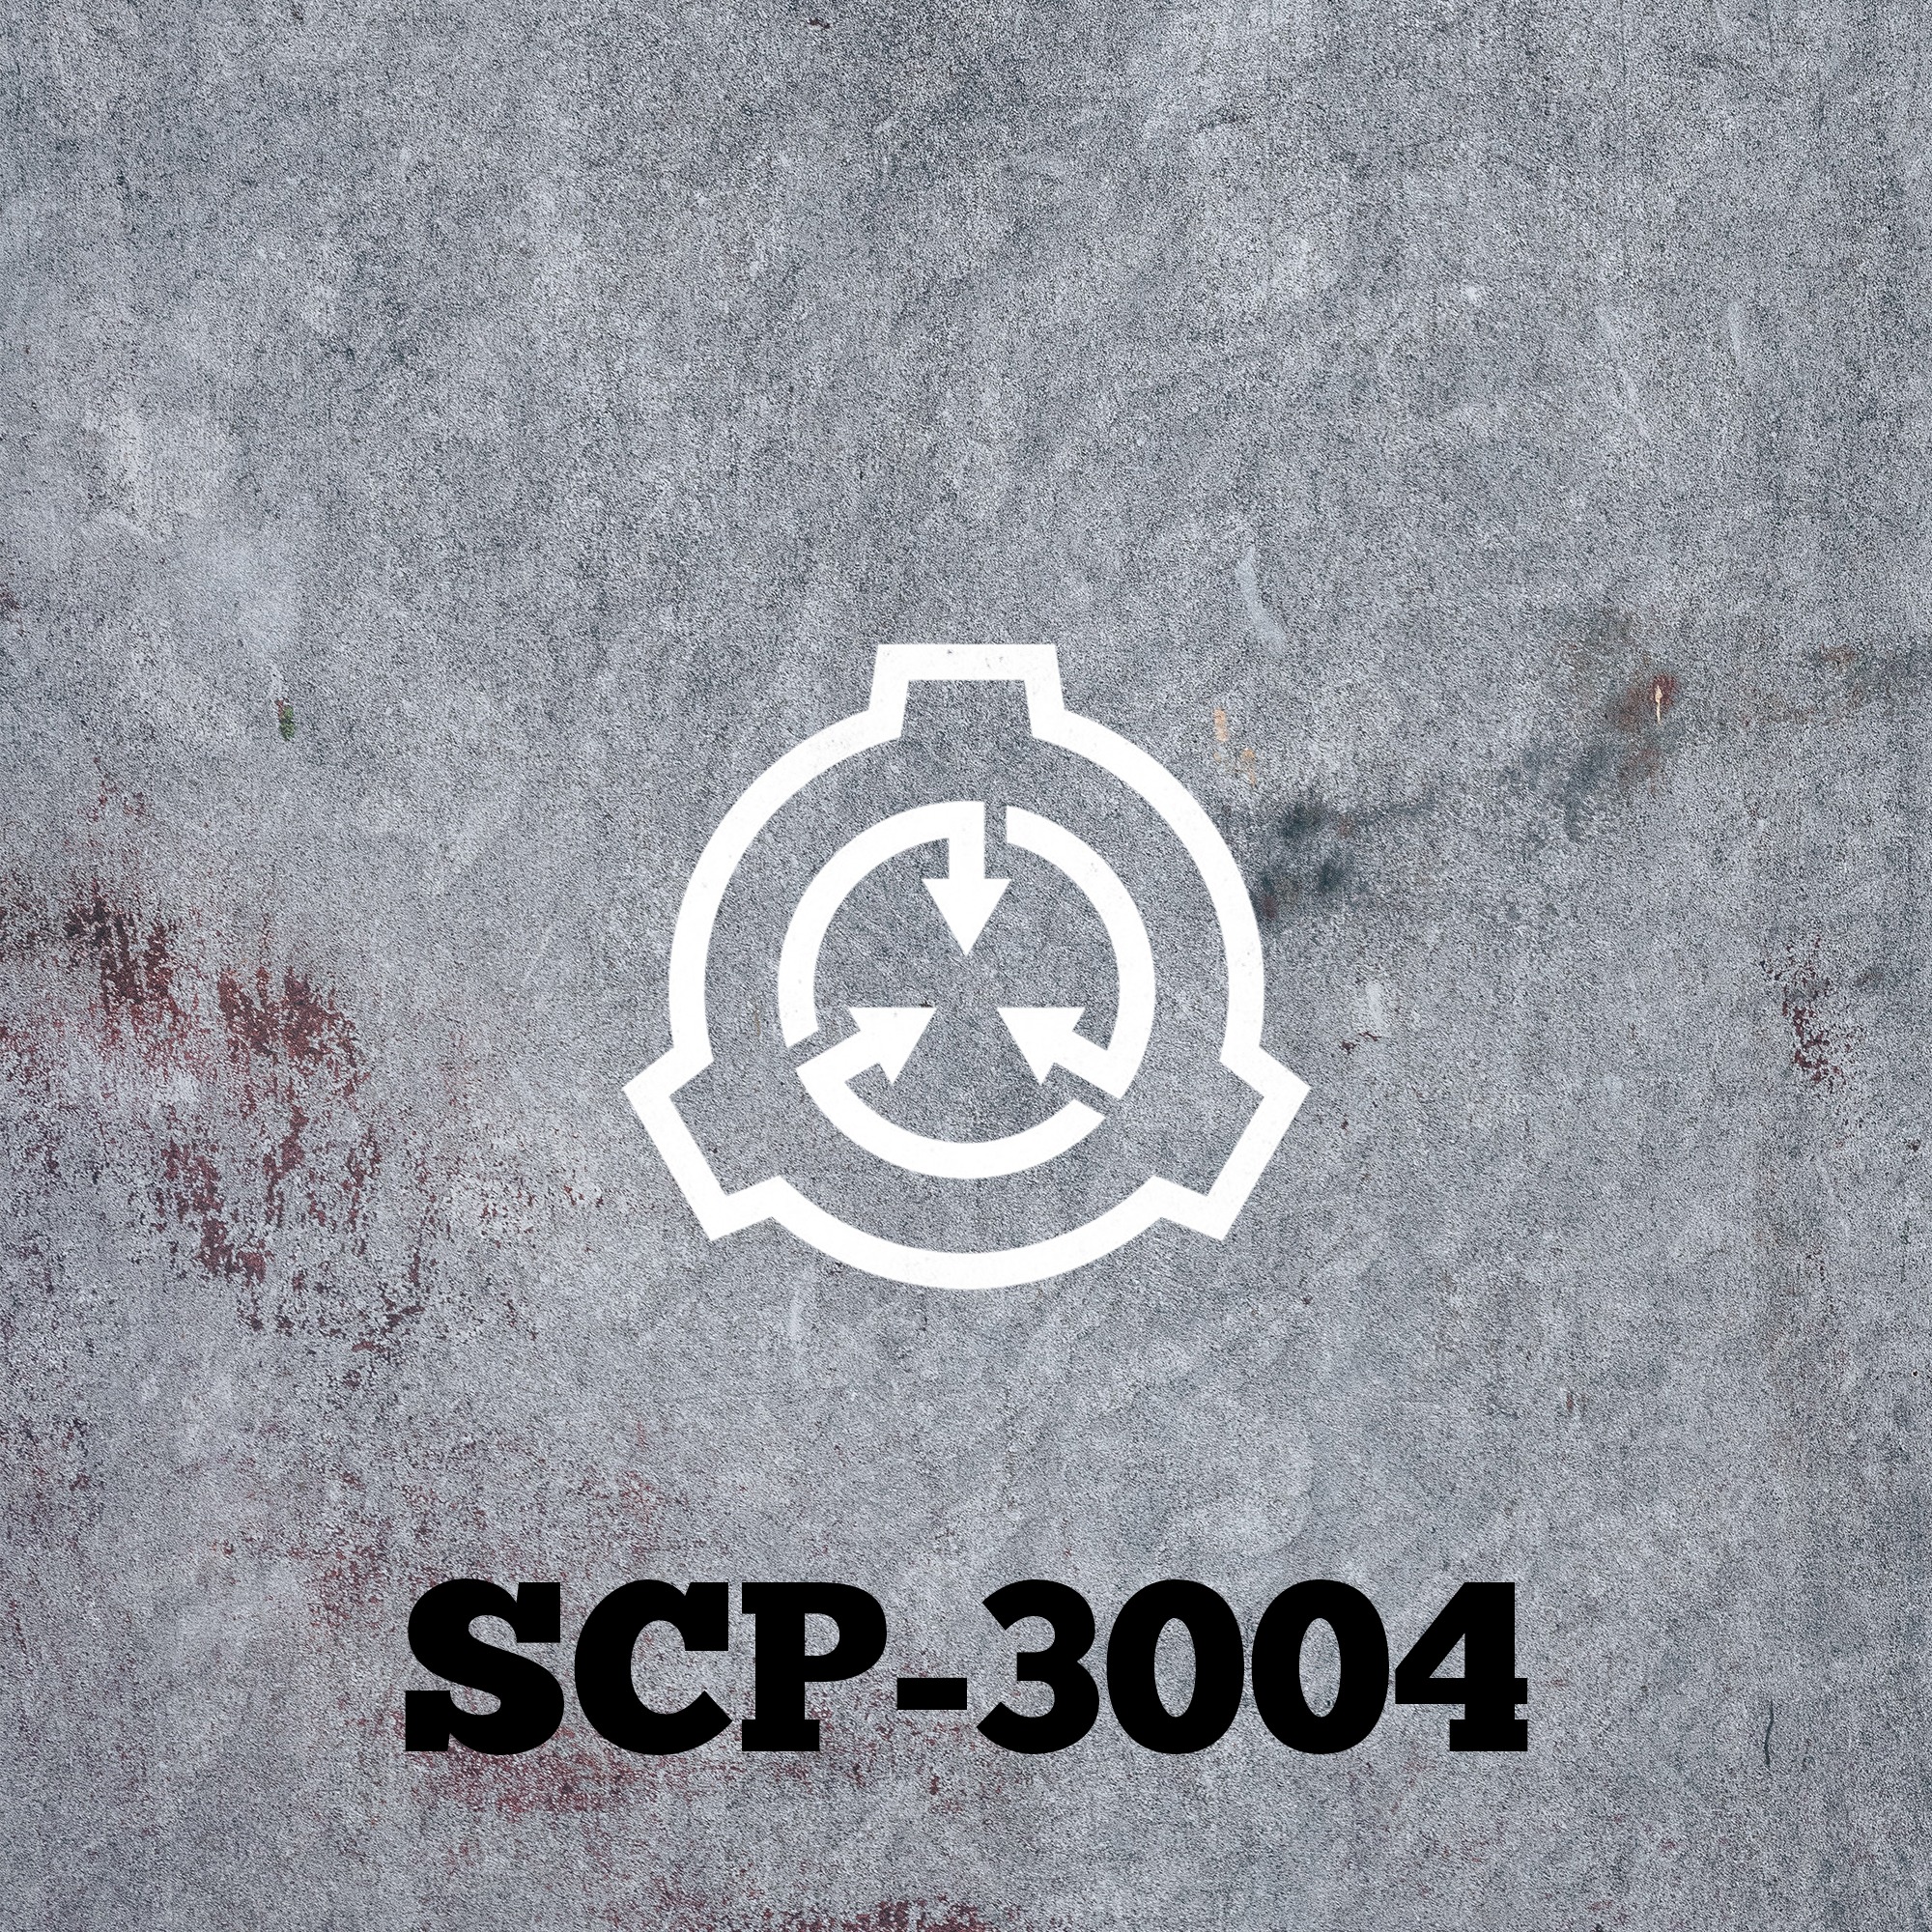 SCP-3004 4/5 Imago (SIGHTSEE-LUX Report)